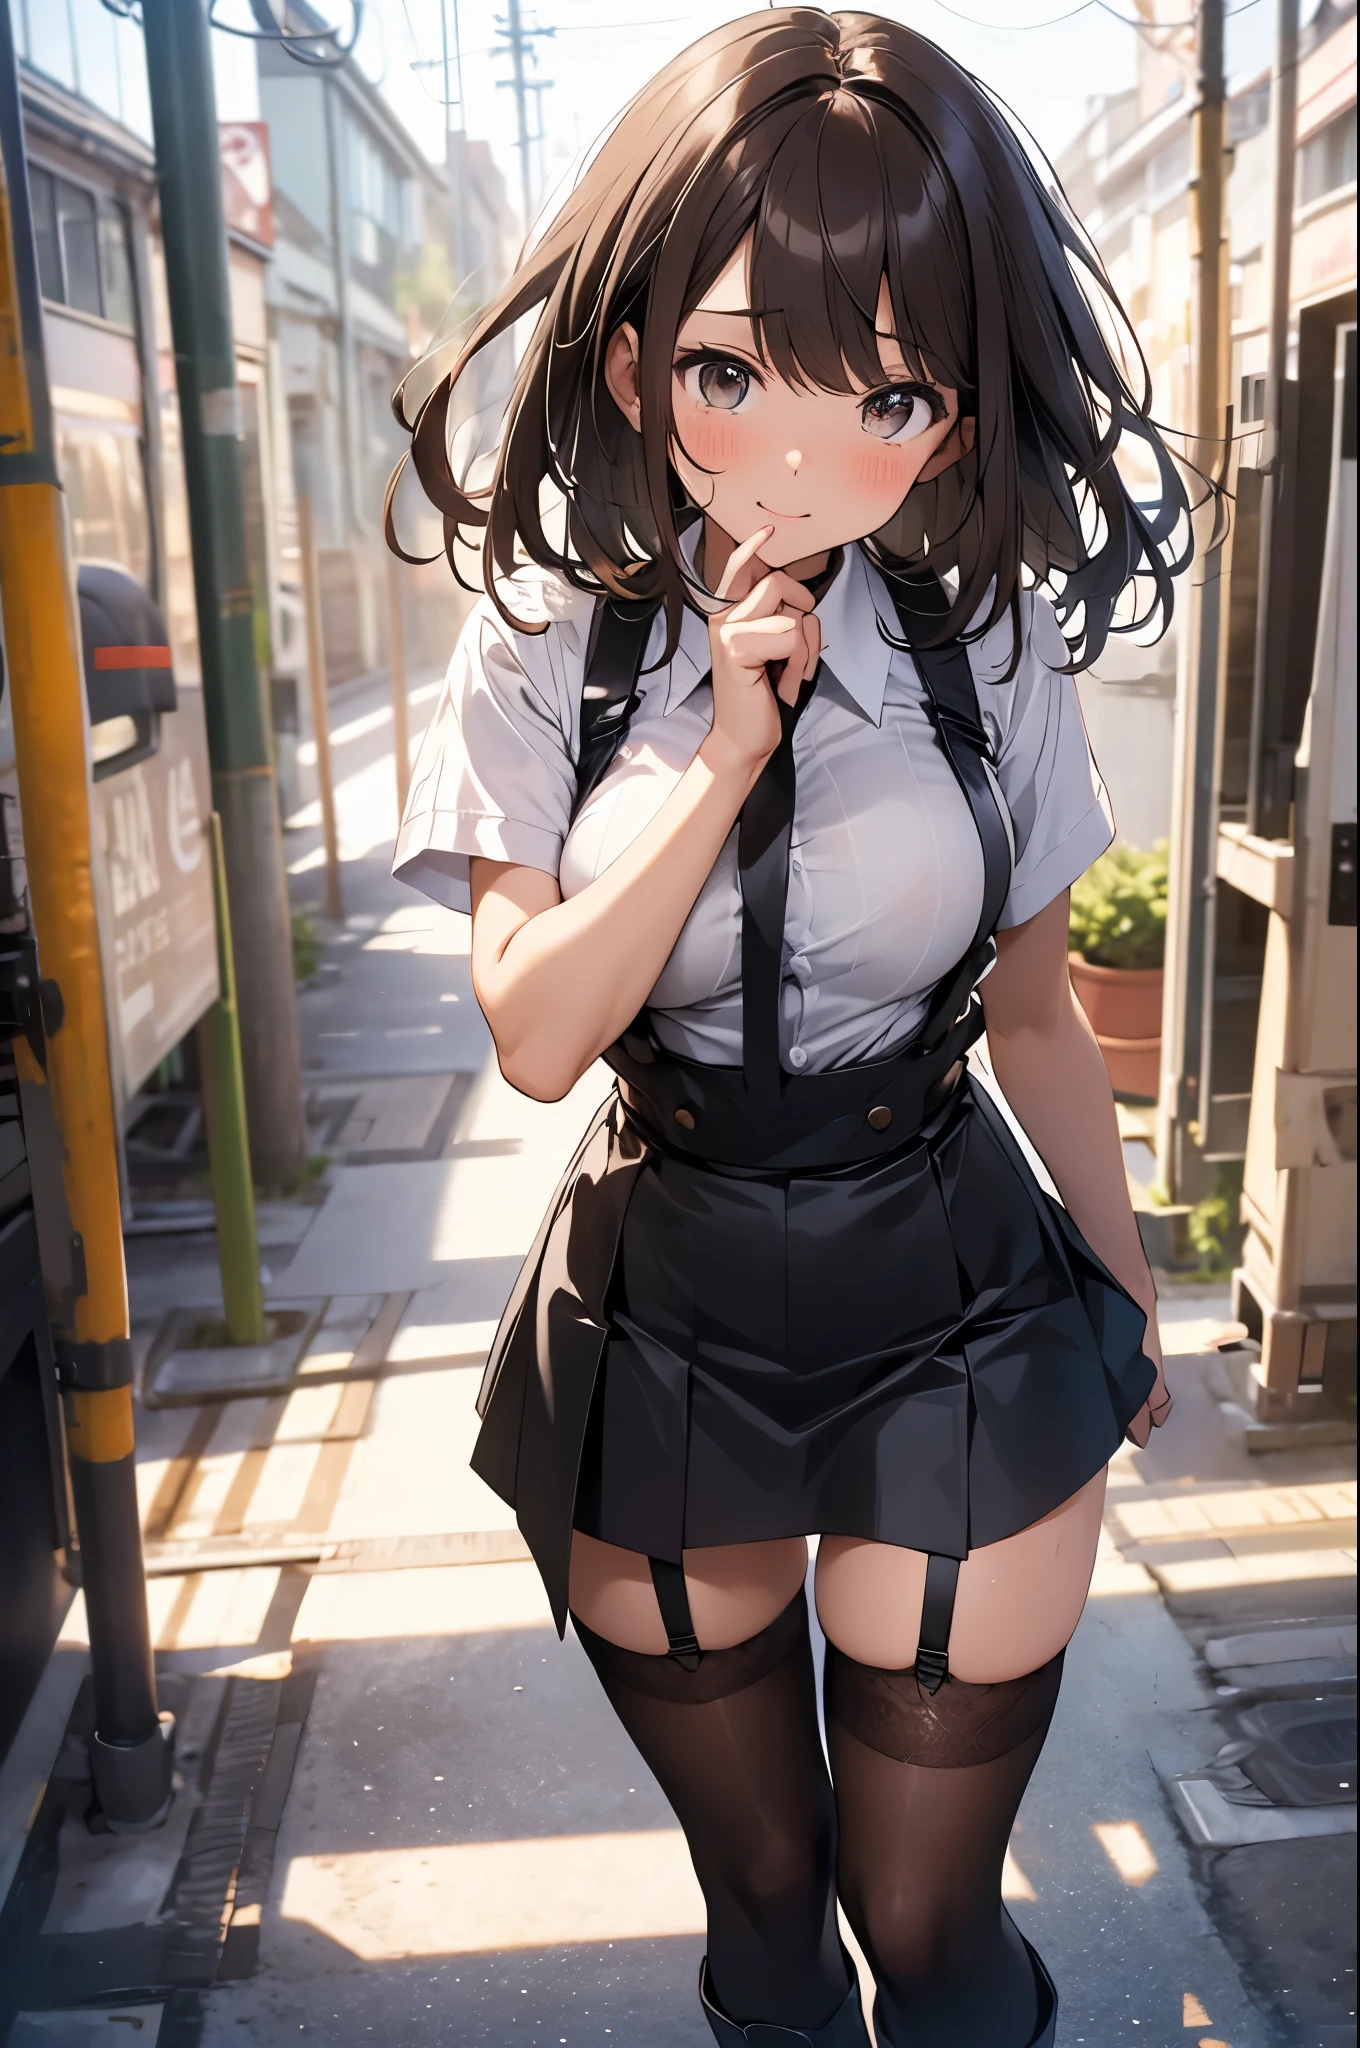 brown hair、looking at the viewer　　suspenders　　　Bulging big breasts　　 　 　　　　Black miniskirt　garter belt　knee high socks　　　　　　Gaze　　　small face　bangs 　　　　　Beauty　　hands up　　 　Gaze 　black boots 　provocation　　armpit sweat　one person 　　put your hands behind your back　cutter shirt　　Panty shot　ginka